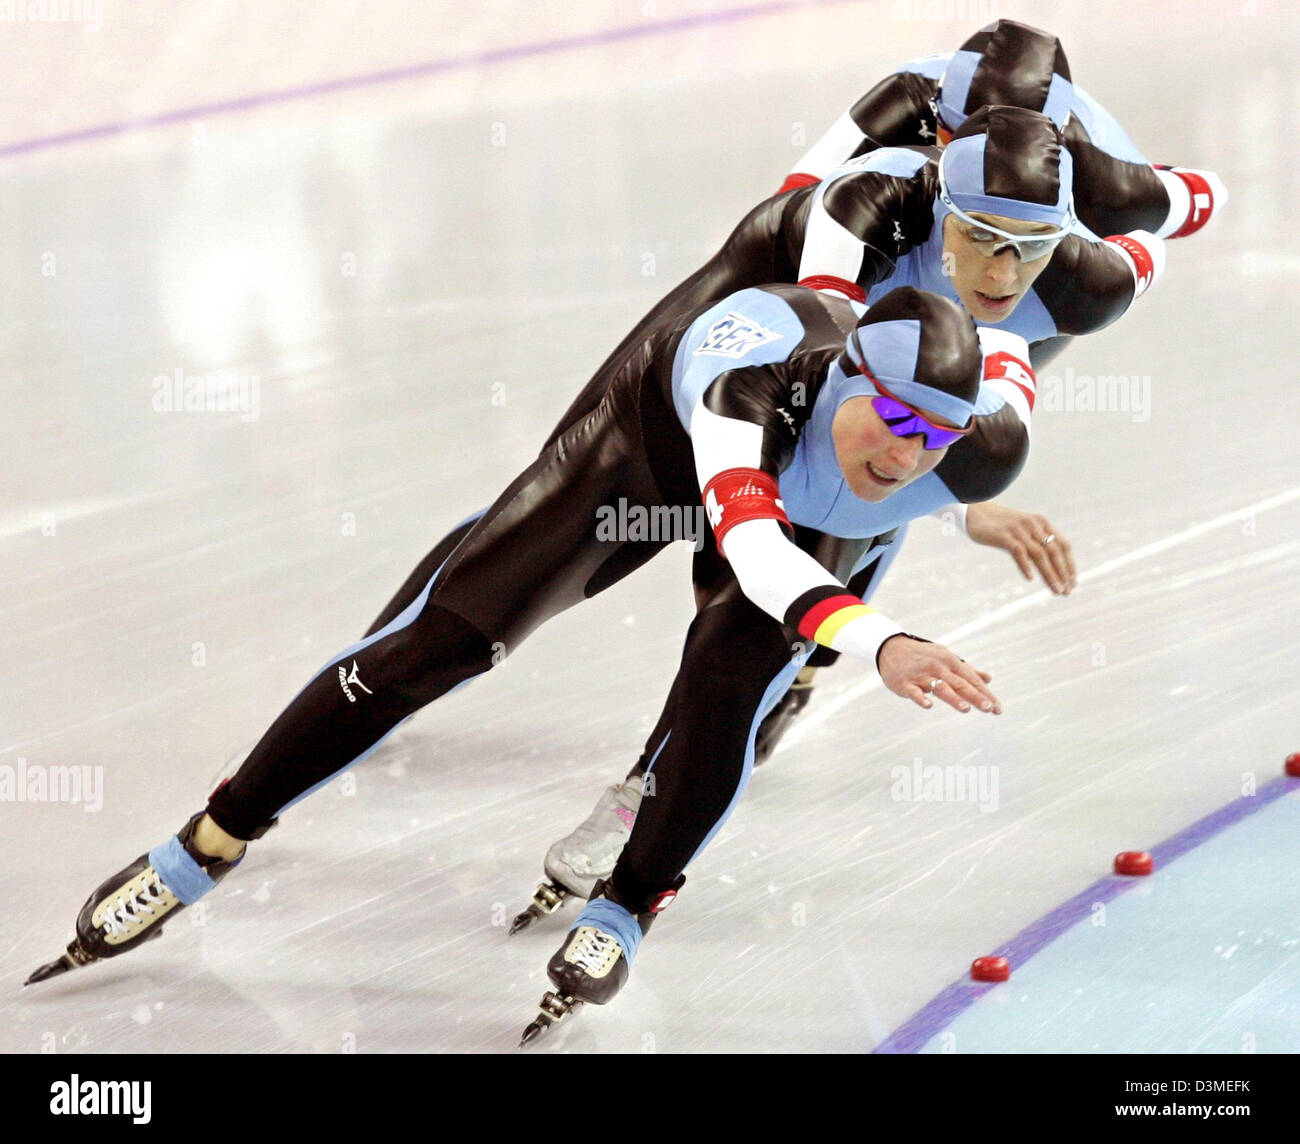 The German Speed Skating team with (F-B) Claudia Pechstein, Anni Friesinger and Daniela Anschuetz-Thoms pictured during the Speed Skating Ladies's Team Pursuit in the Olympic speed skating rink Lingotto, Italy, 16 February 2006. Photo: Frank May Stock Photo